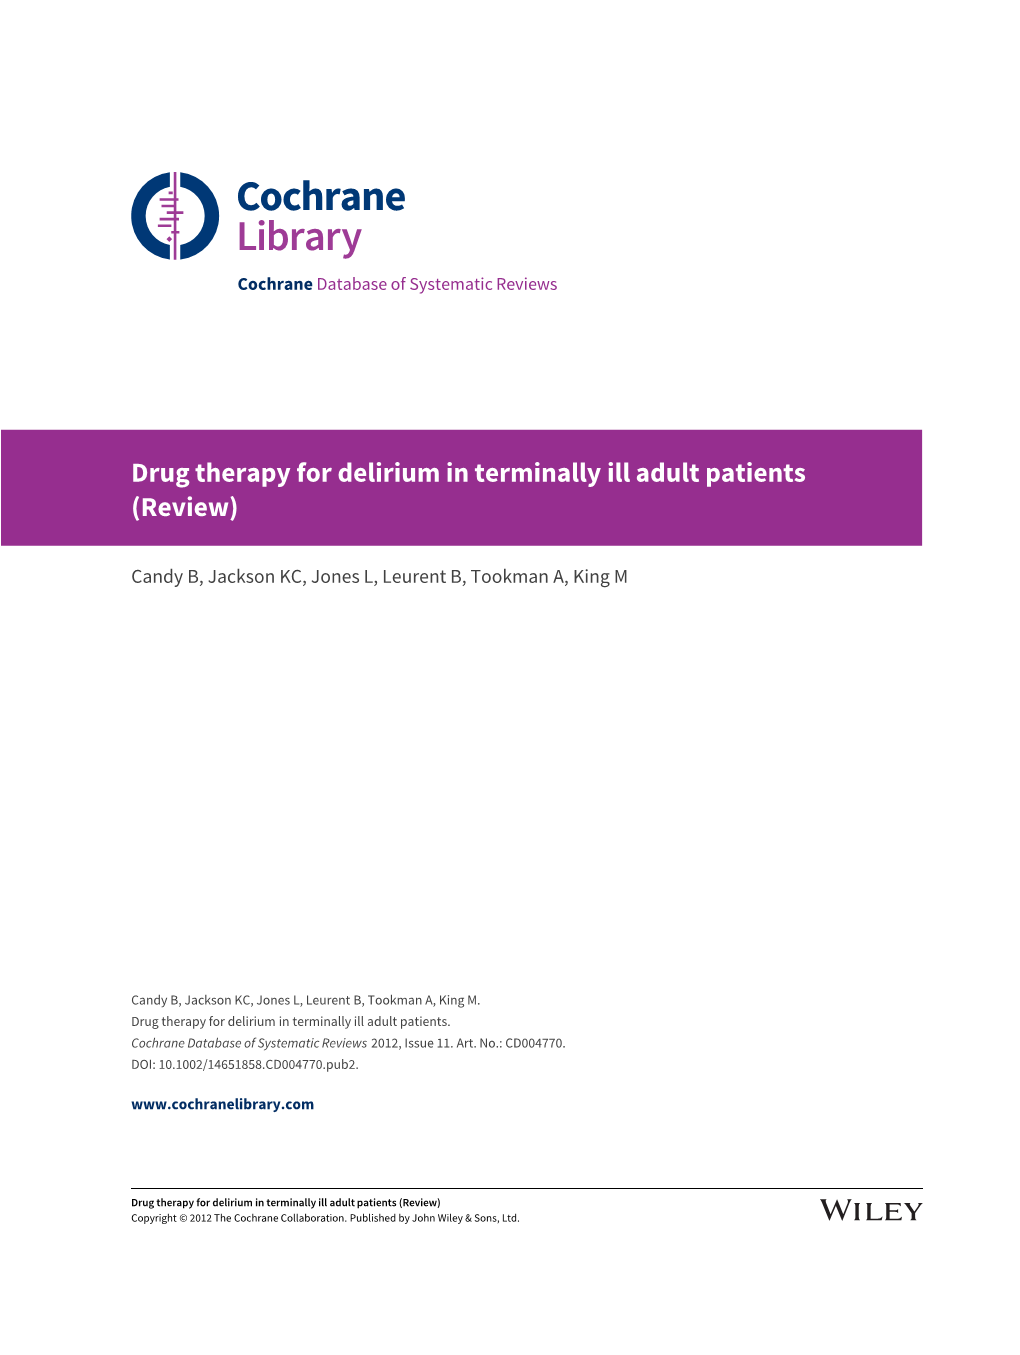 Drug Therapy for Delirium in Terminally Ill Adult Patients (Review)